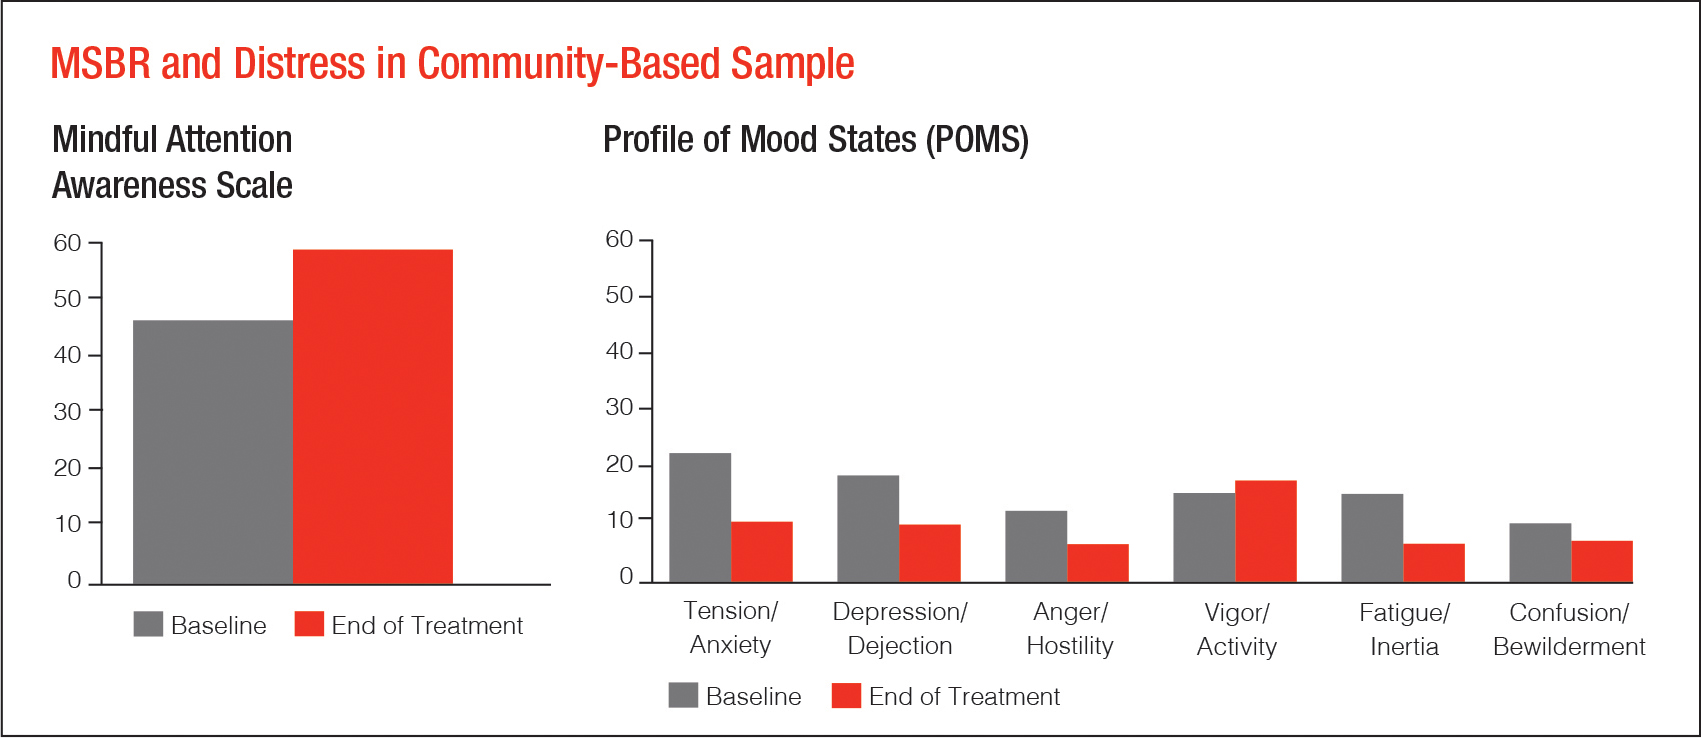 MSBR and distress in community-based sample